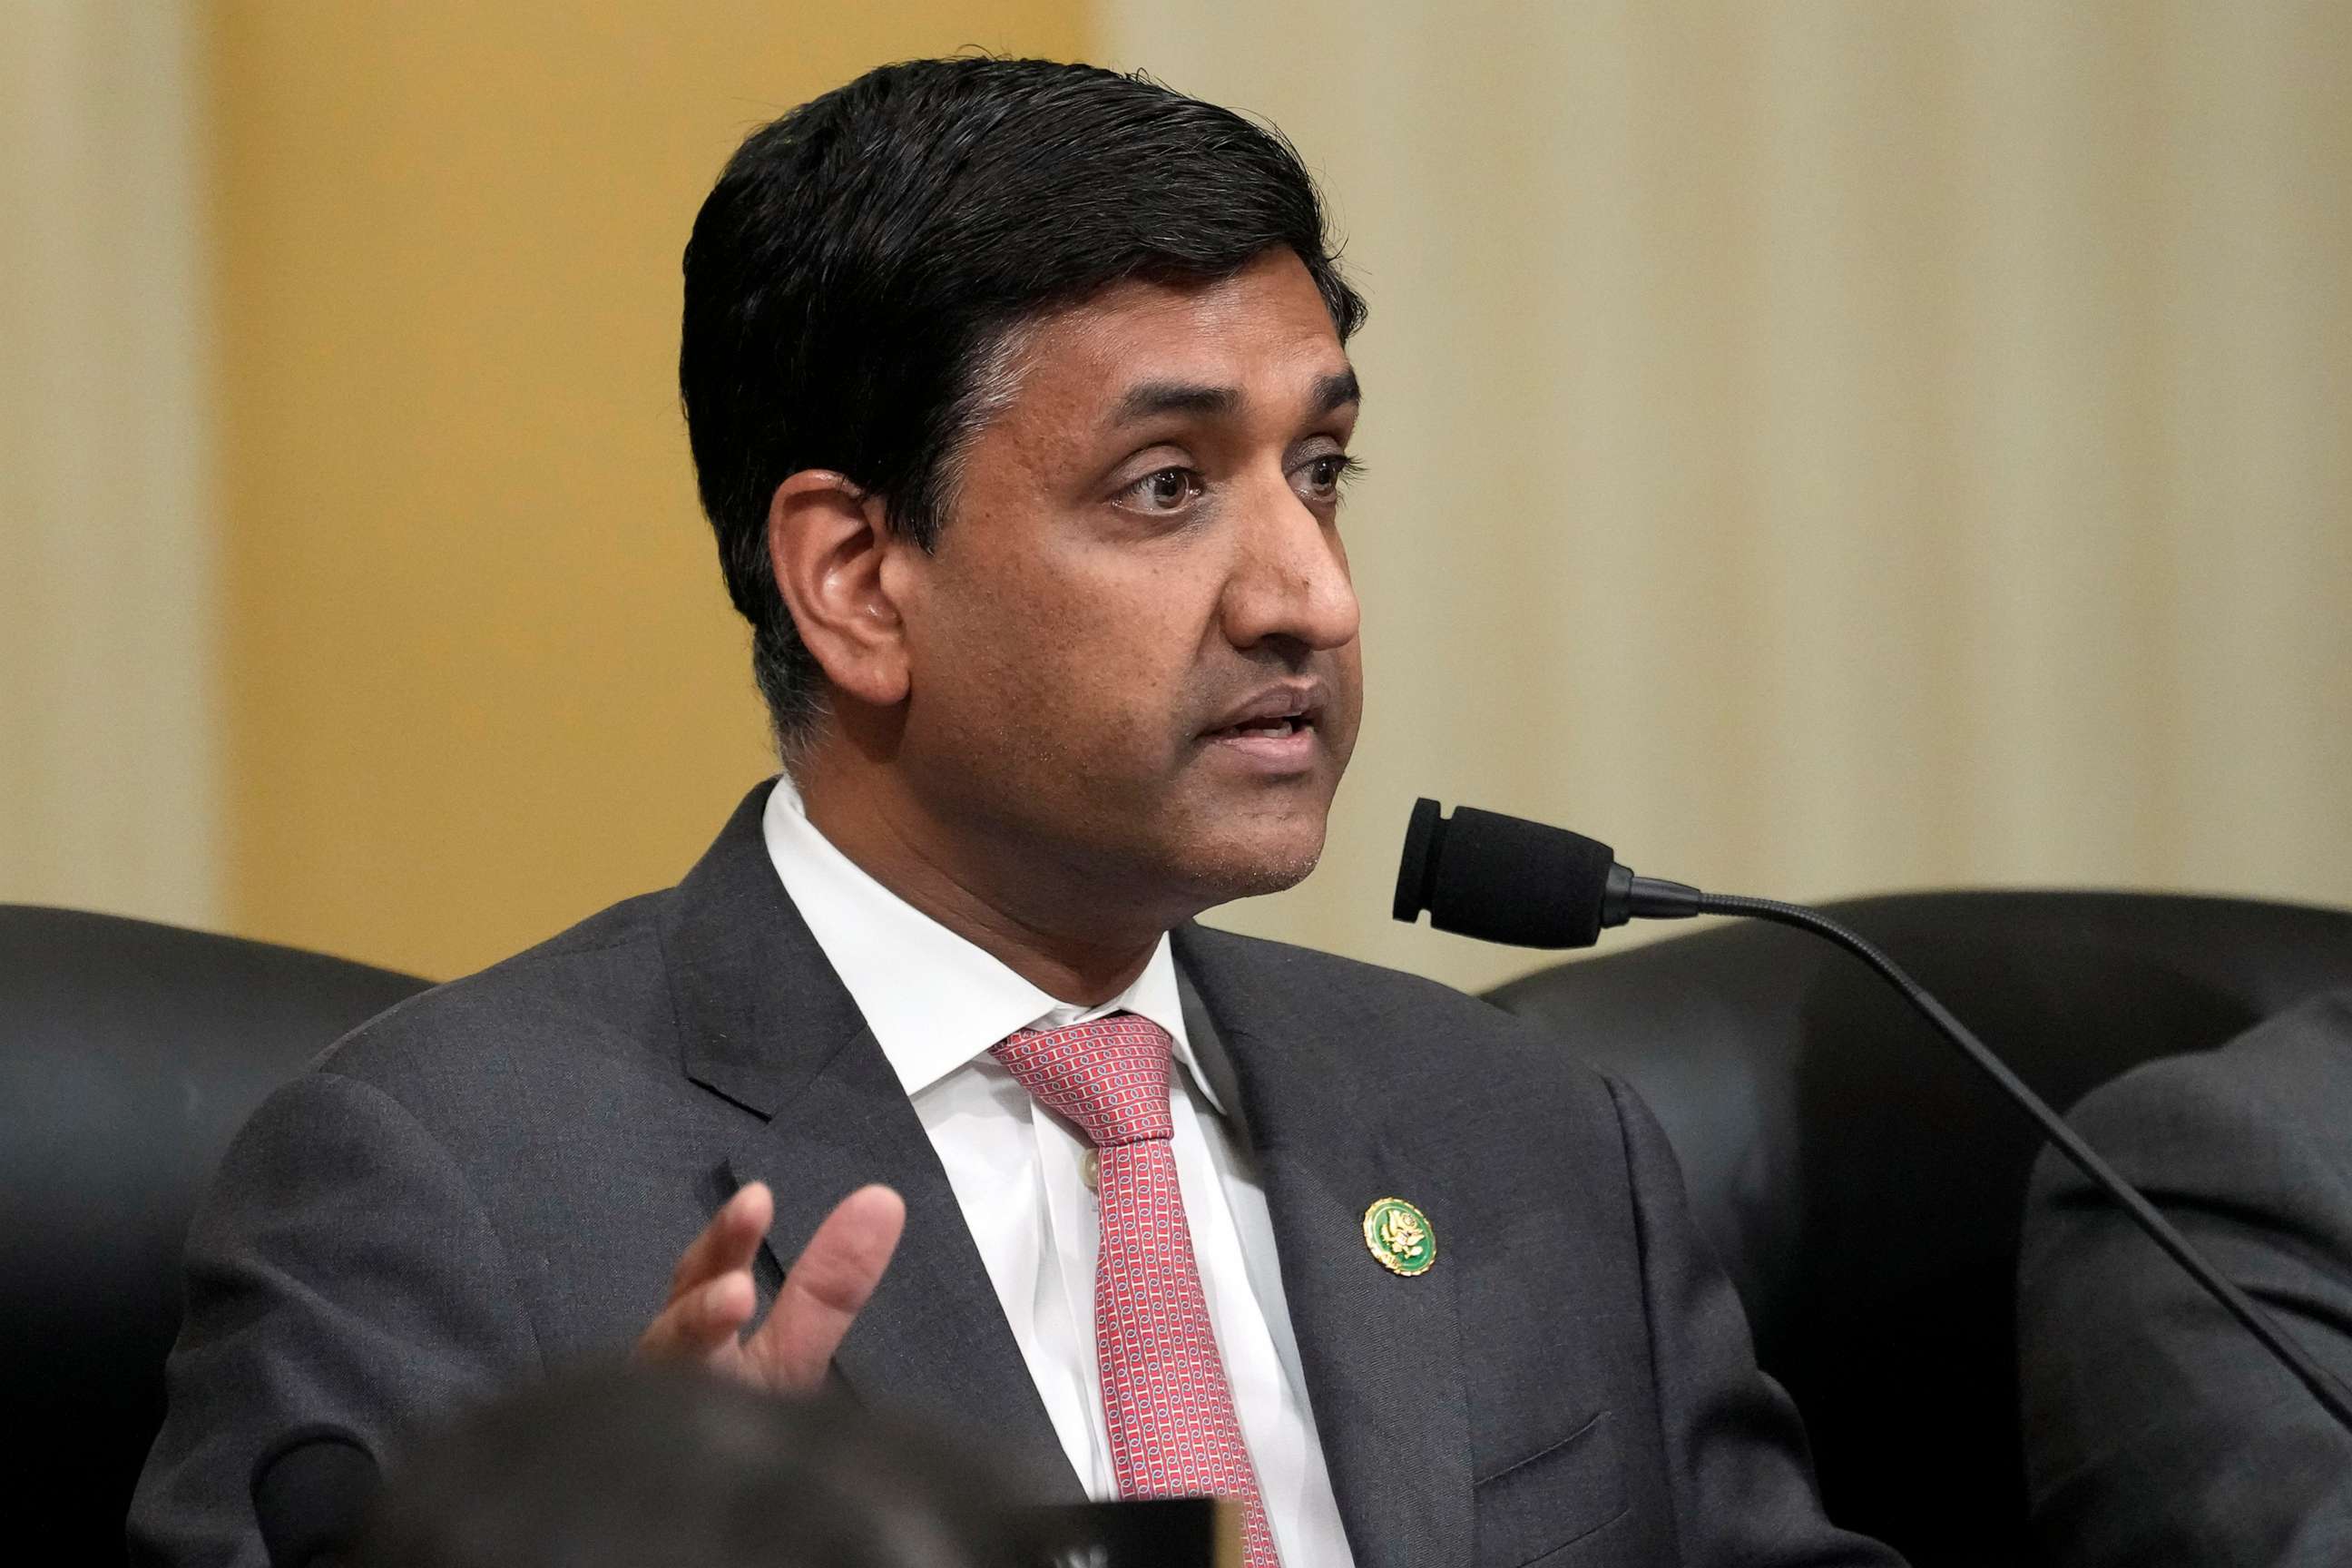 PHOTO: In this Feb. 28, 2023, file photo, Rep. Ro Khanna questions witnesses during a hearing of a special House committee dedicated to countering China, on Capitol Hill, in Washington, D.C.